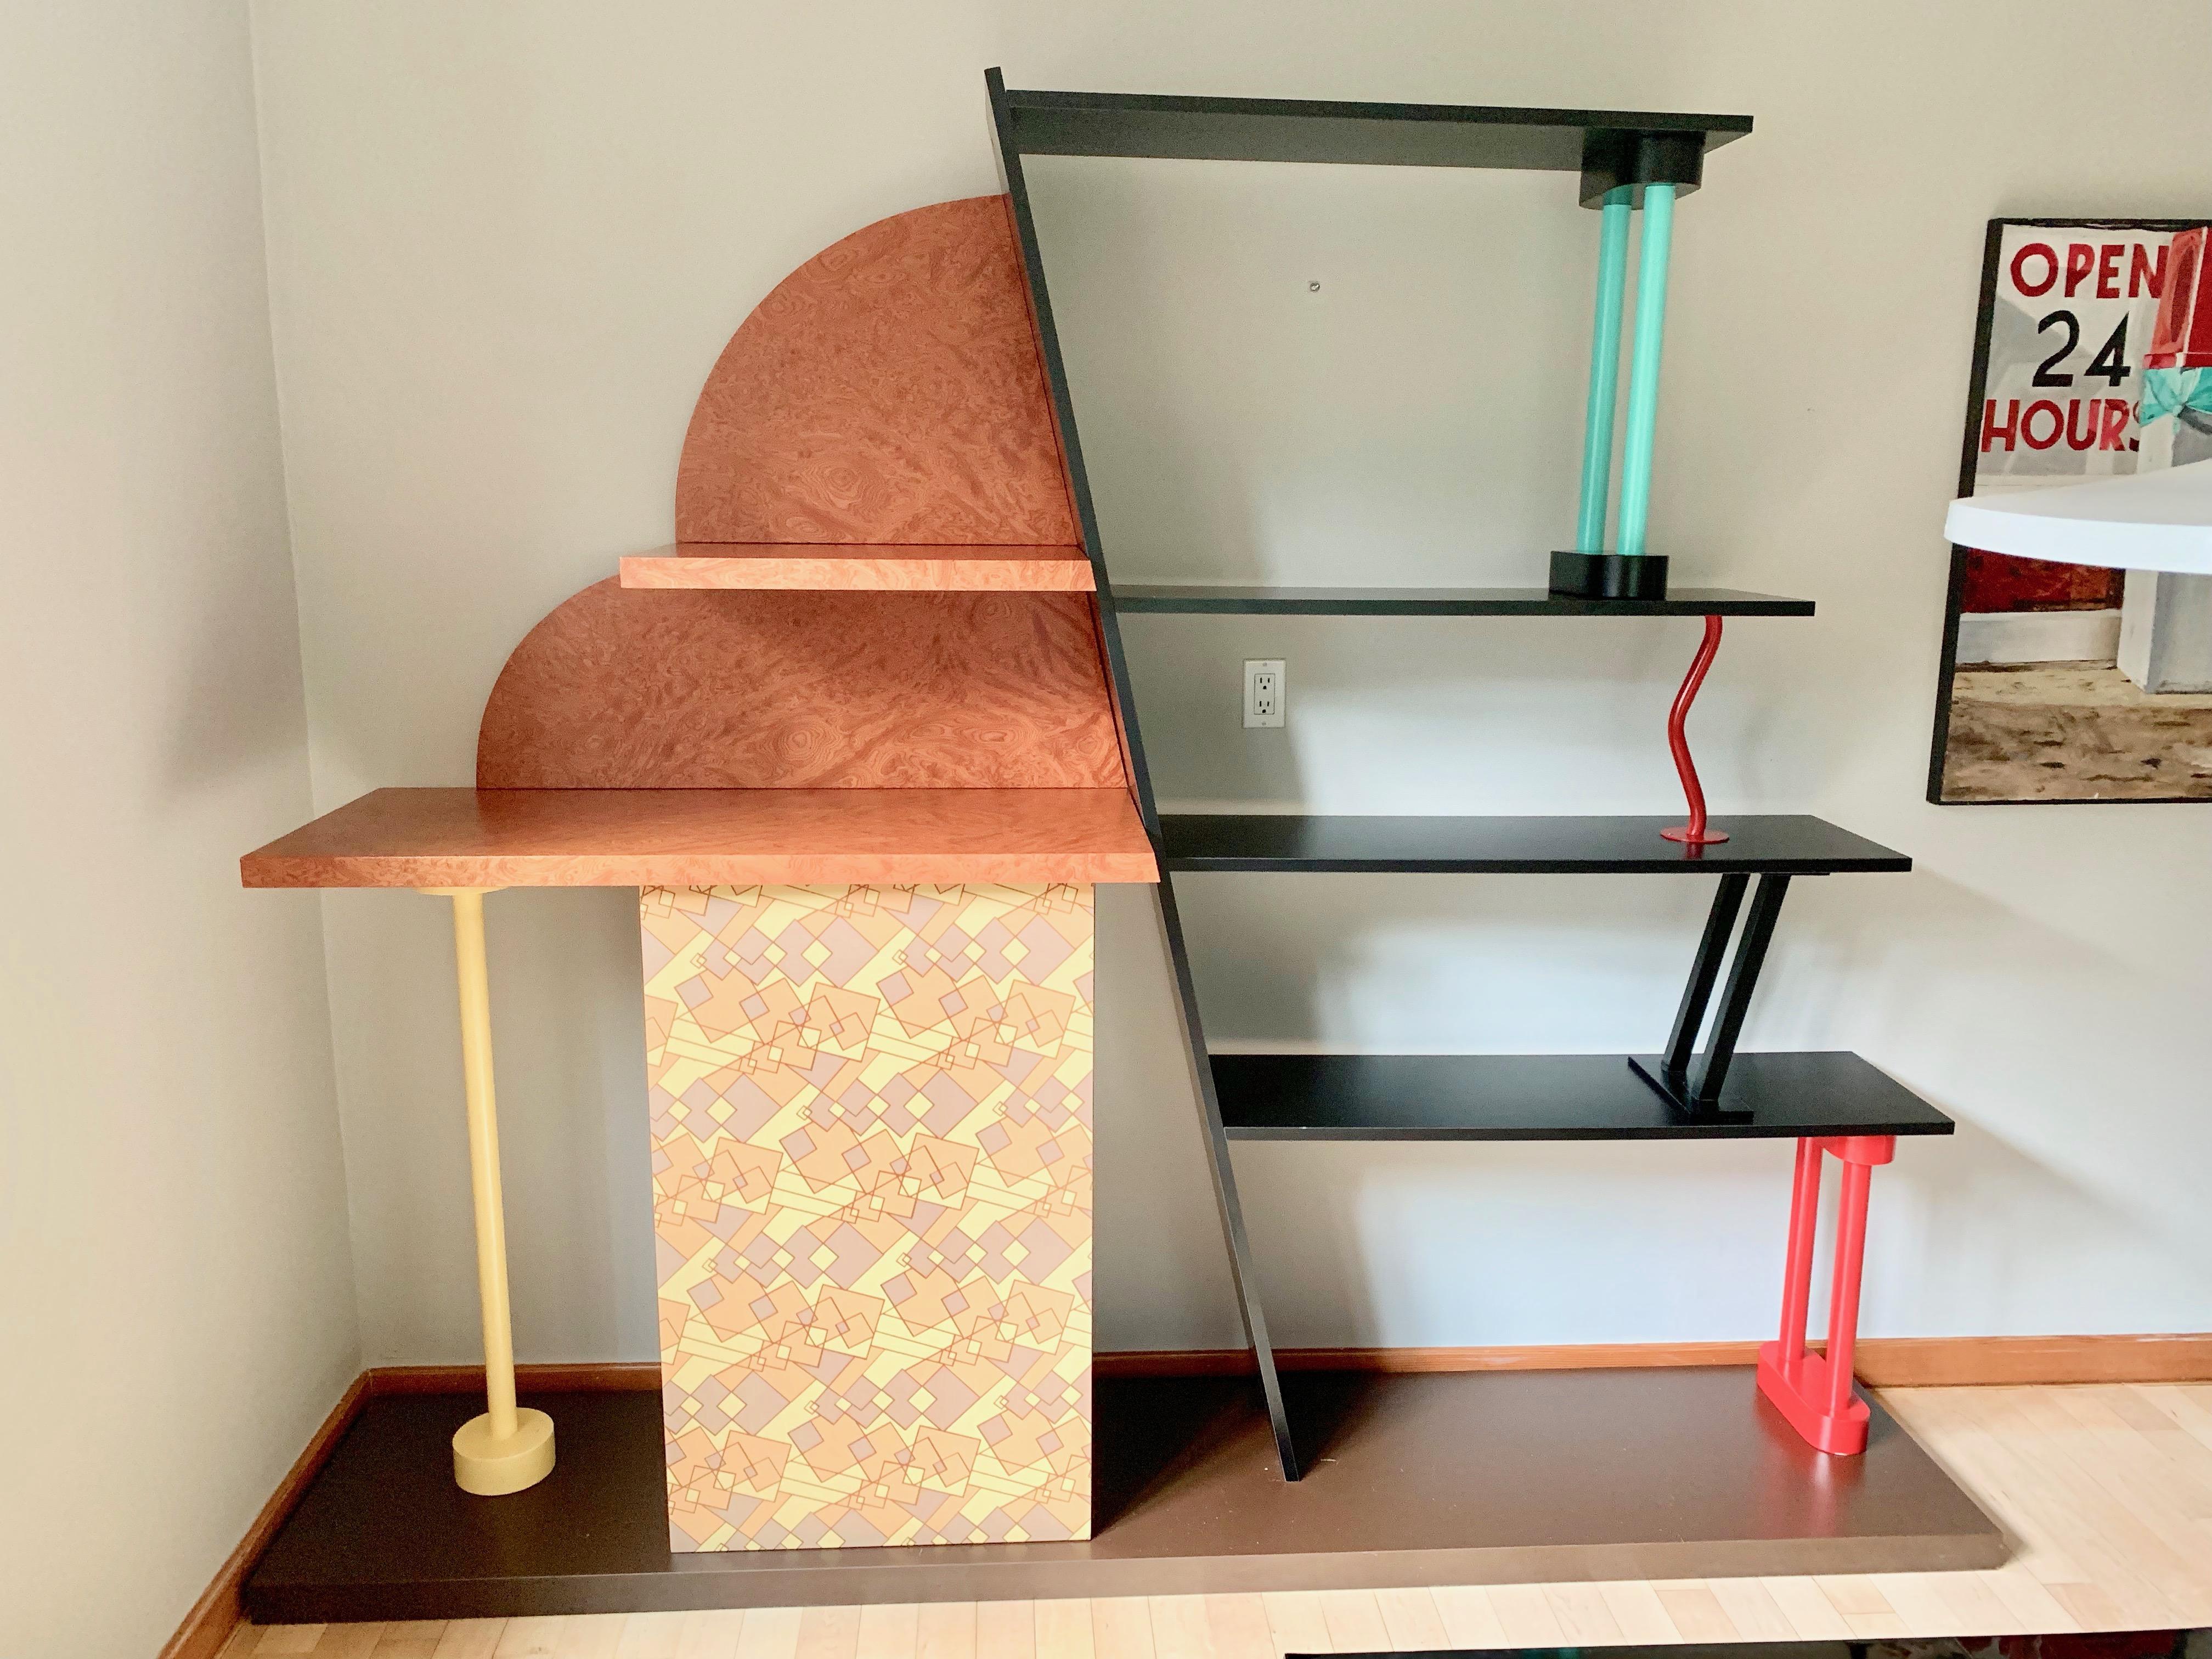 Terrific example of Memphis furniture by Ettore Sottsass. Made in 1982 for Memphis Milano in Italy. Laminated wood zig-zag shelves with enameled steel rods in varying colors. Large cupboard with geometric patterns. Fantastic sculptural shelf